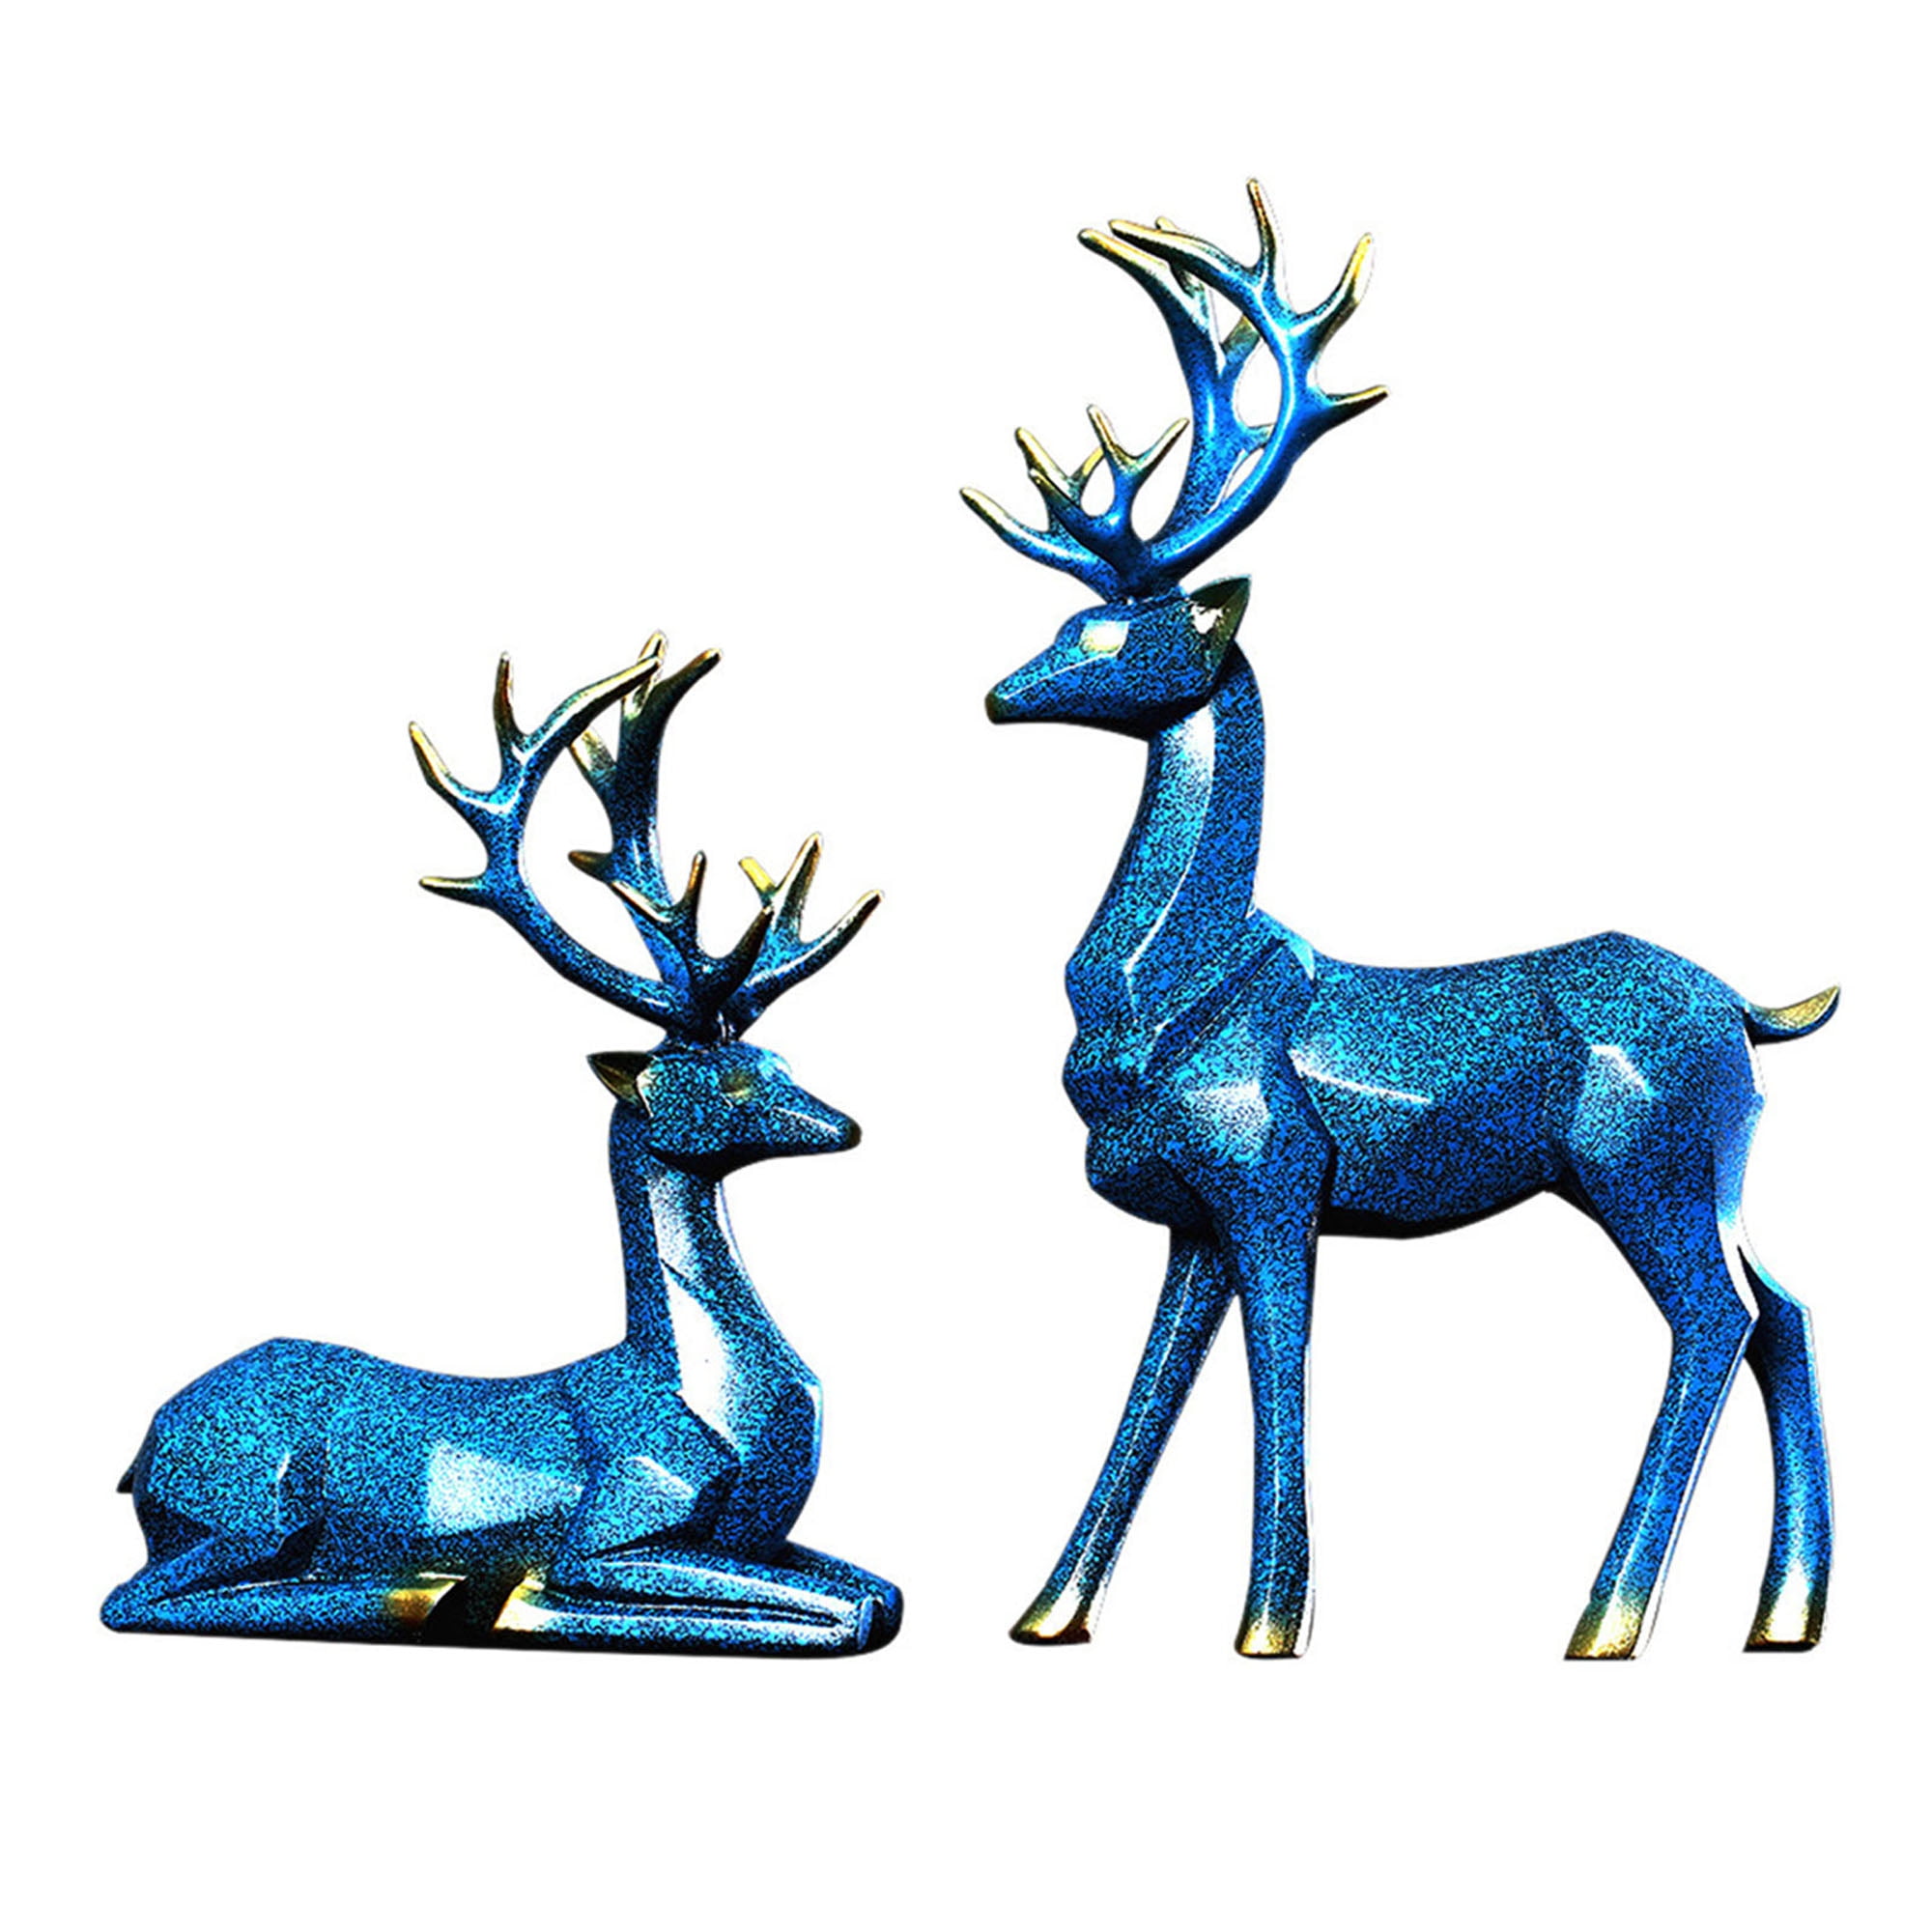 Crystal Deer Parten Engarved Paperweight Figurine Sculpture Party Mother's Gifts